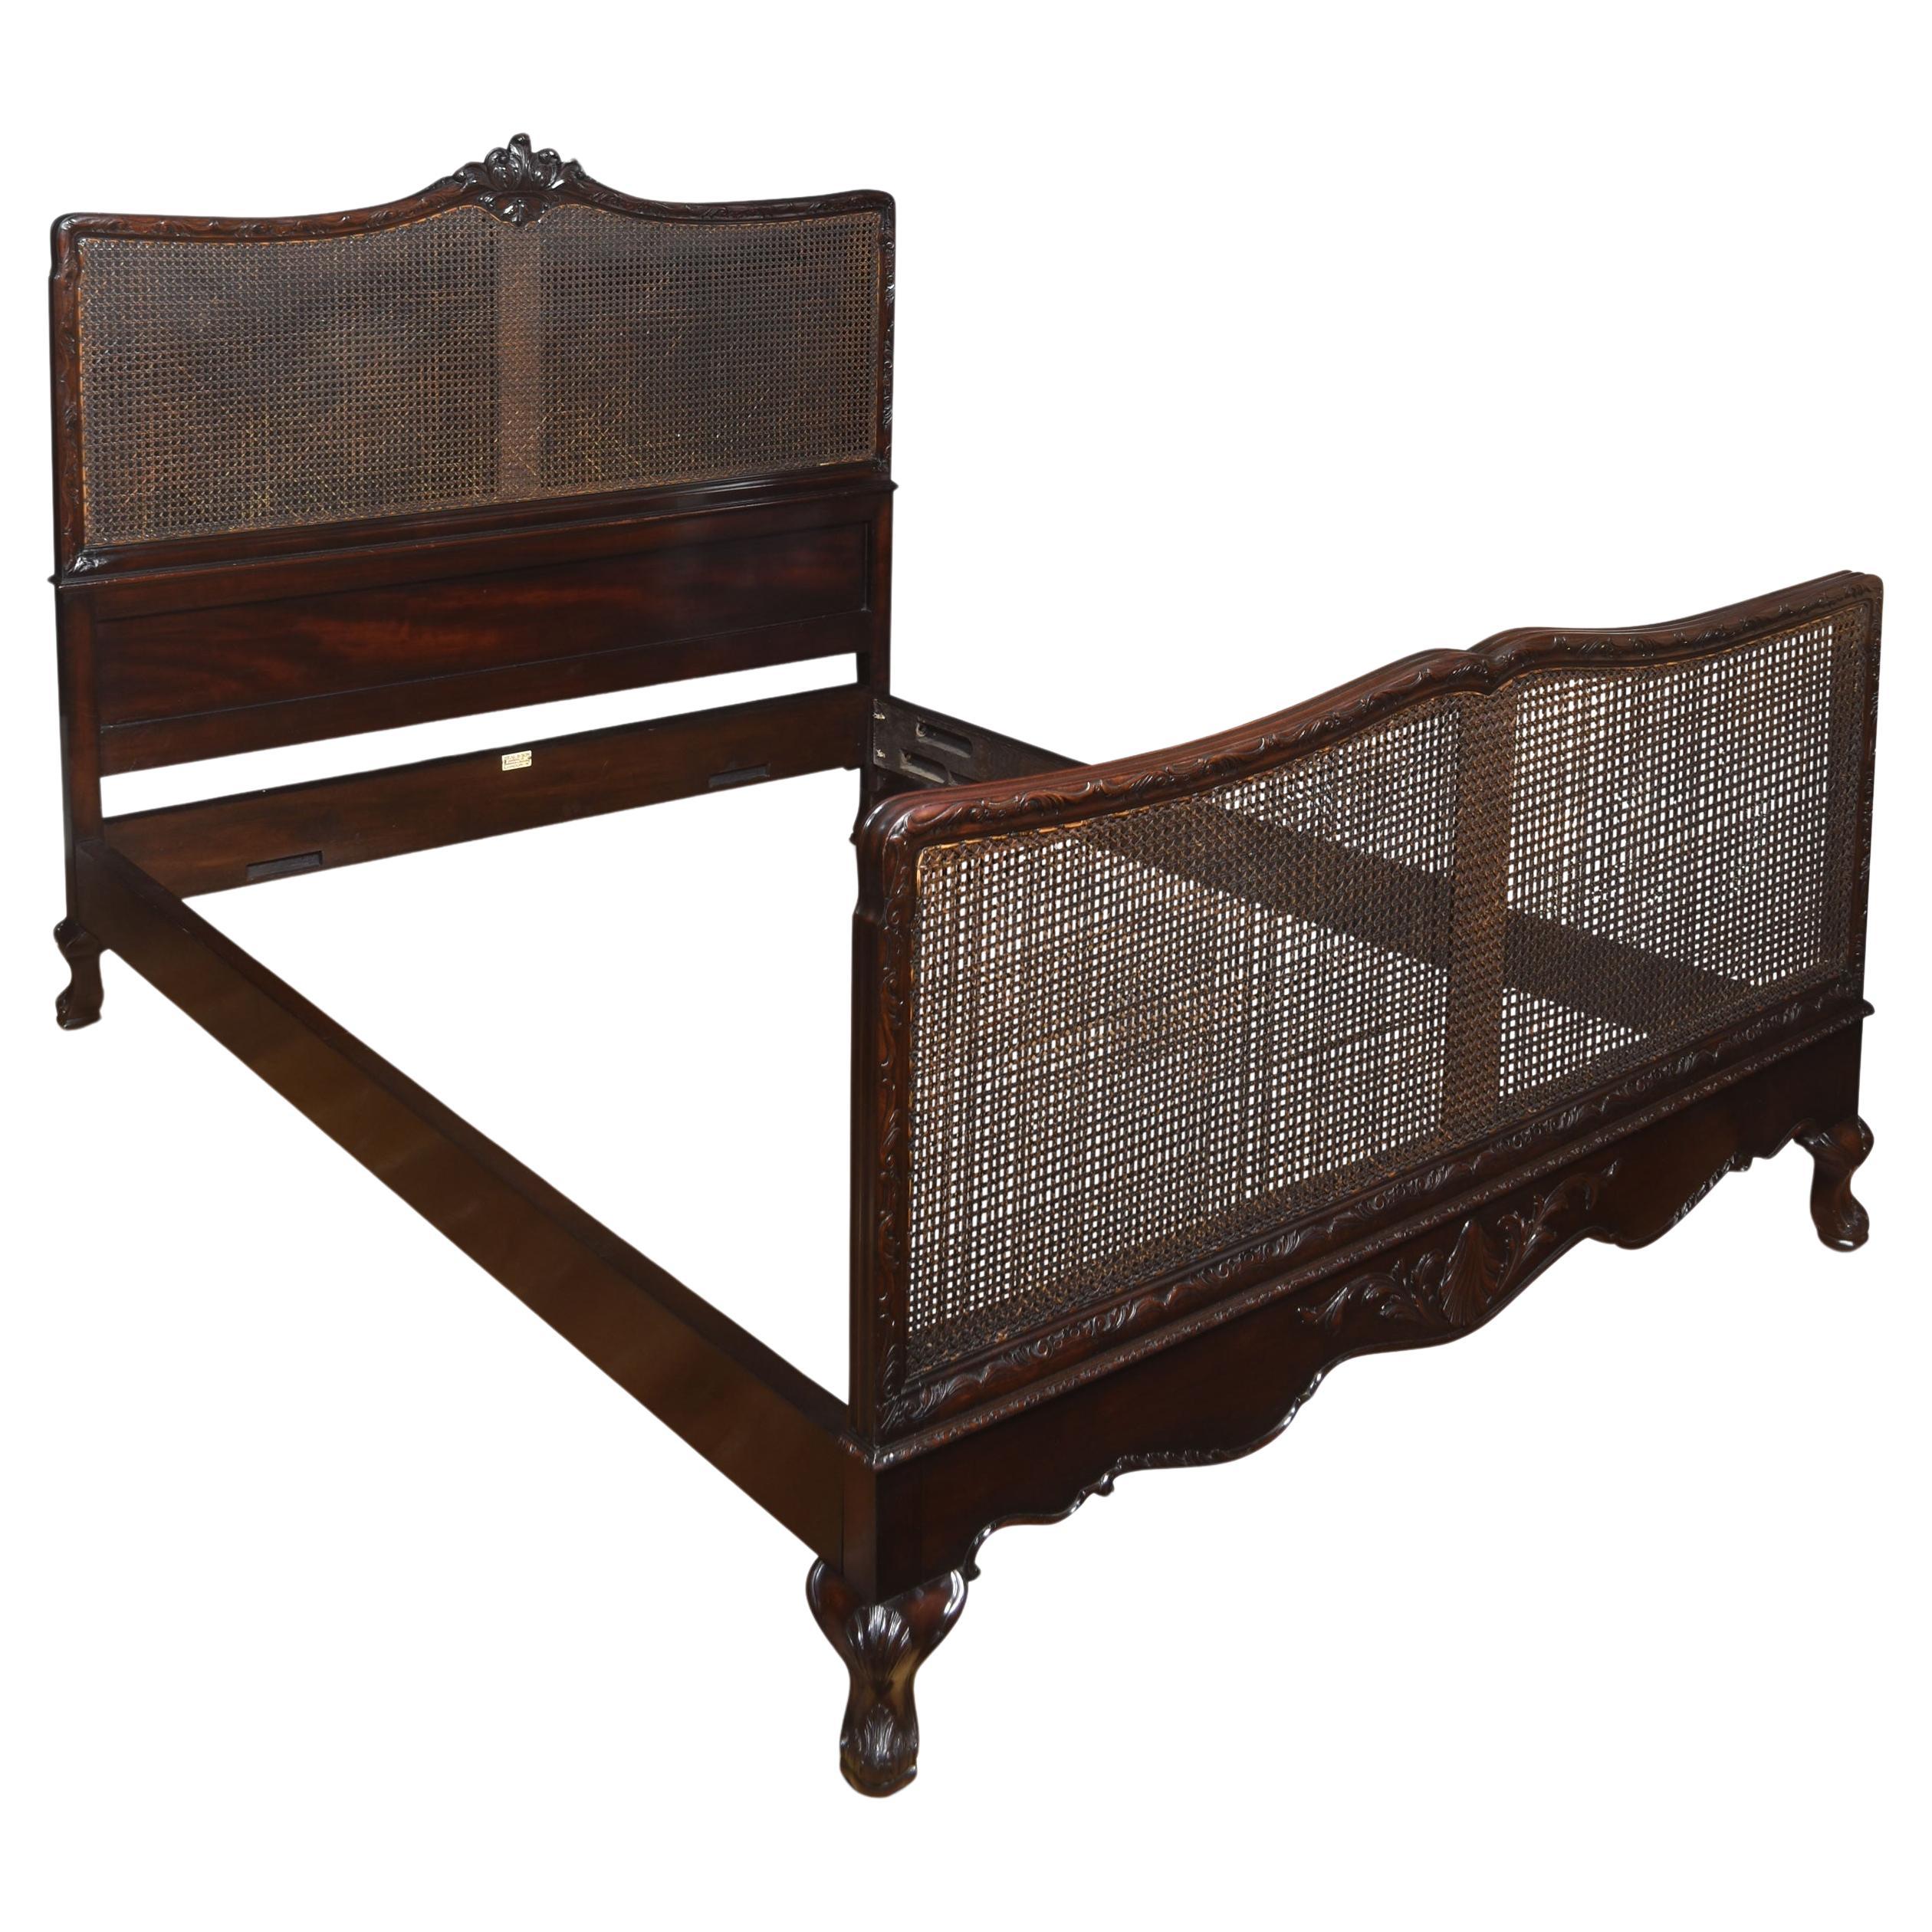 Heals of London king size bed